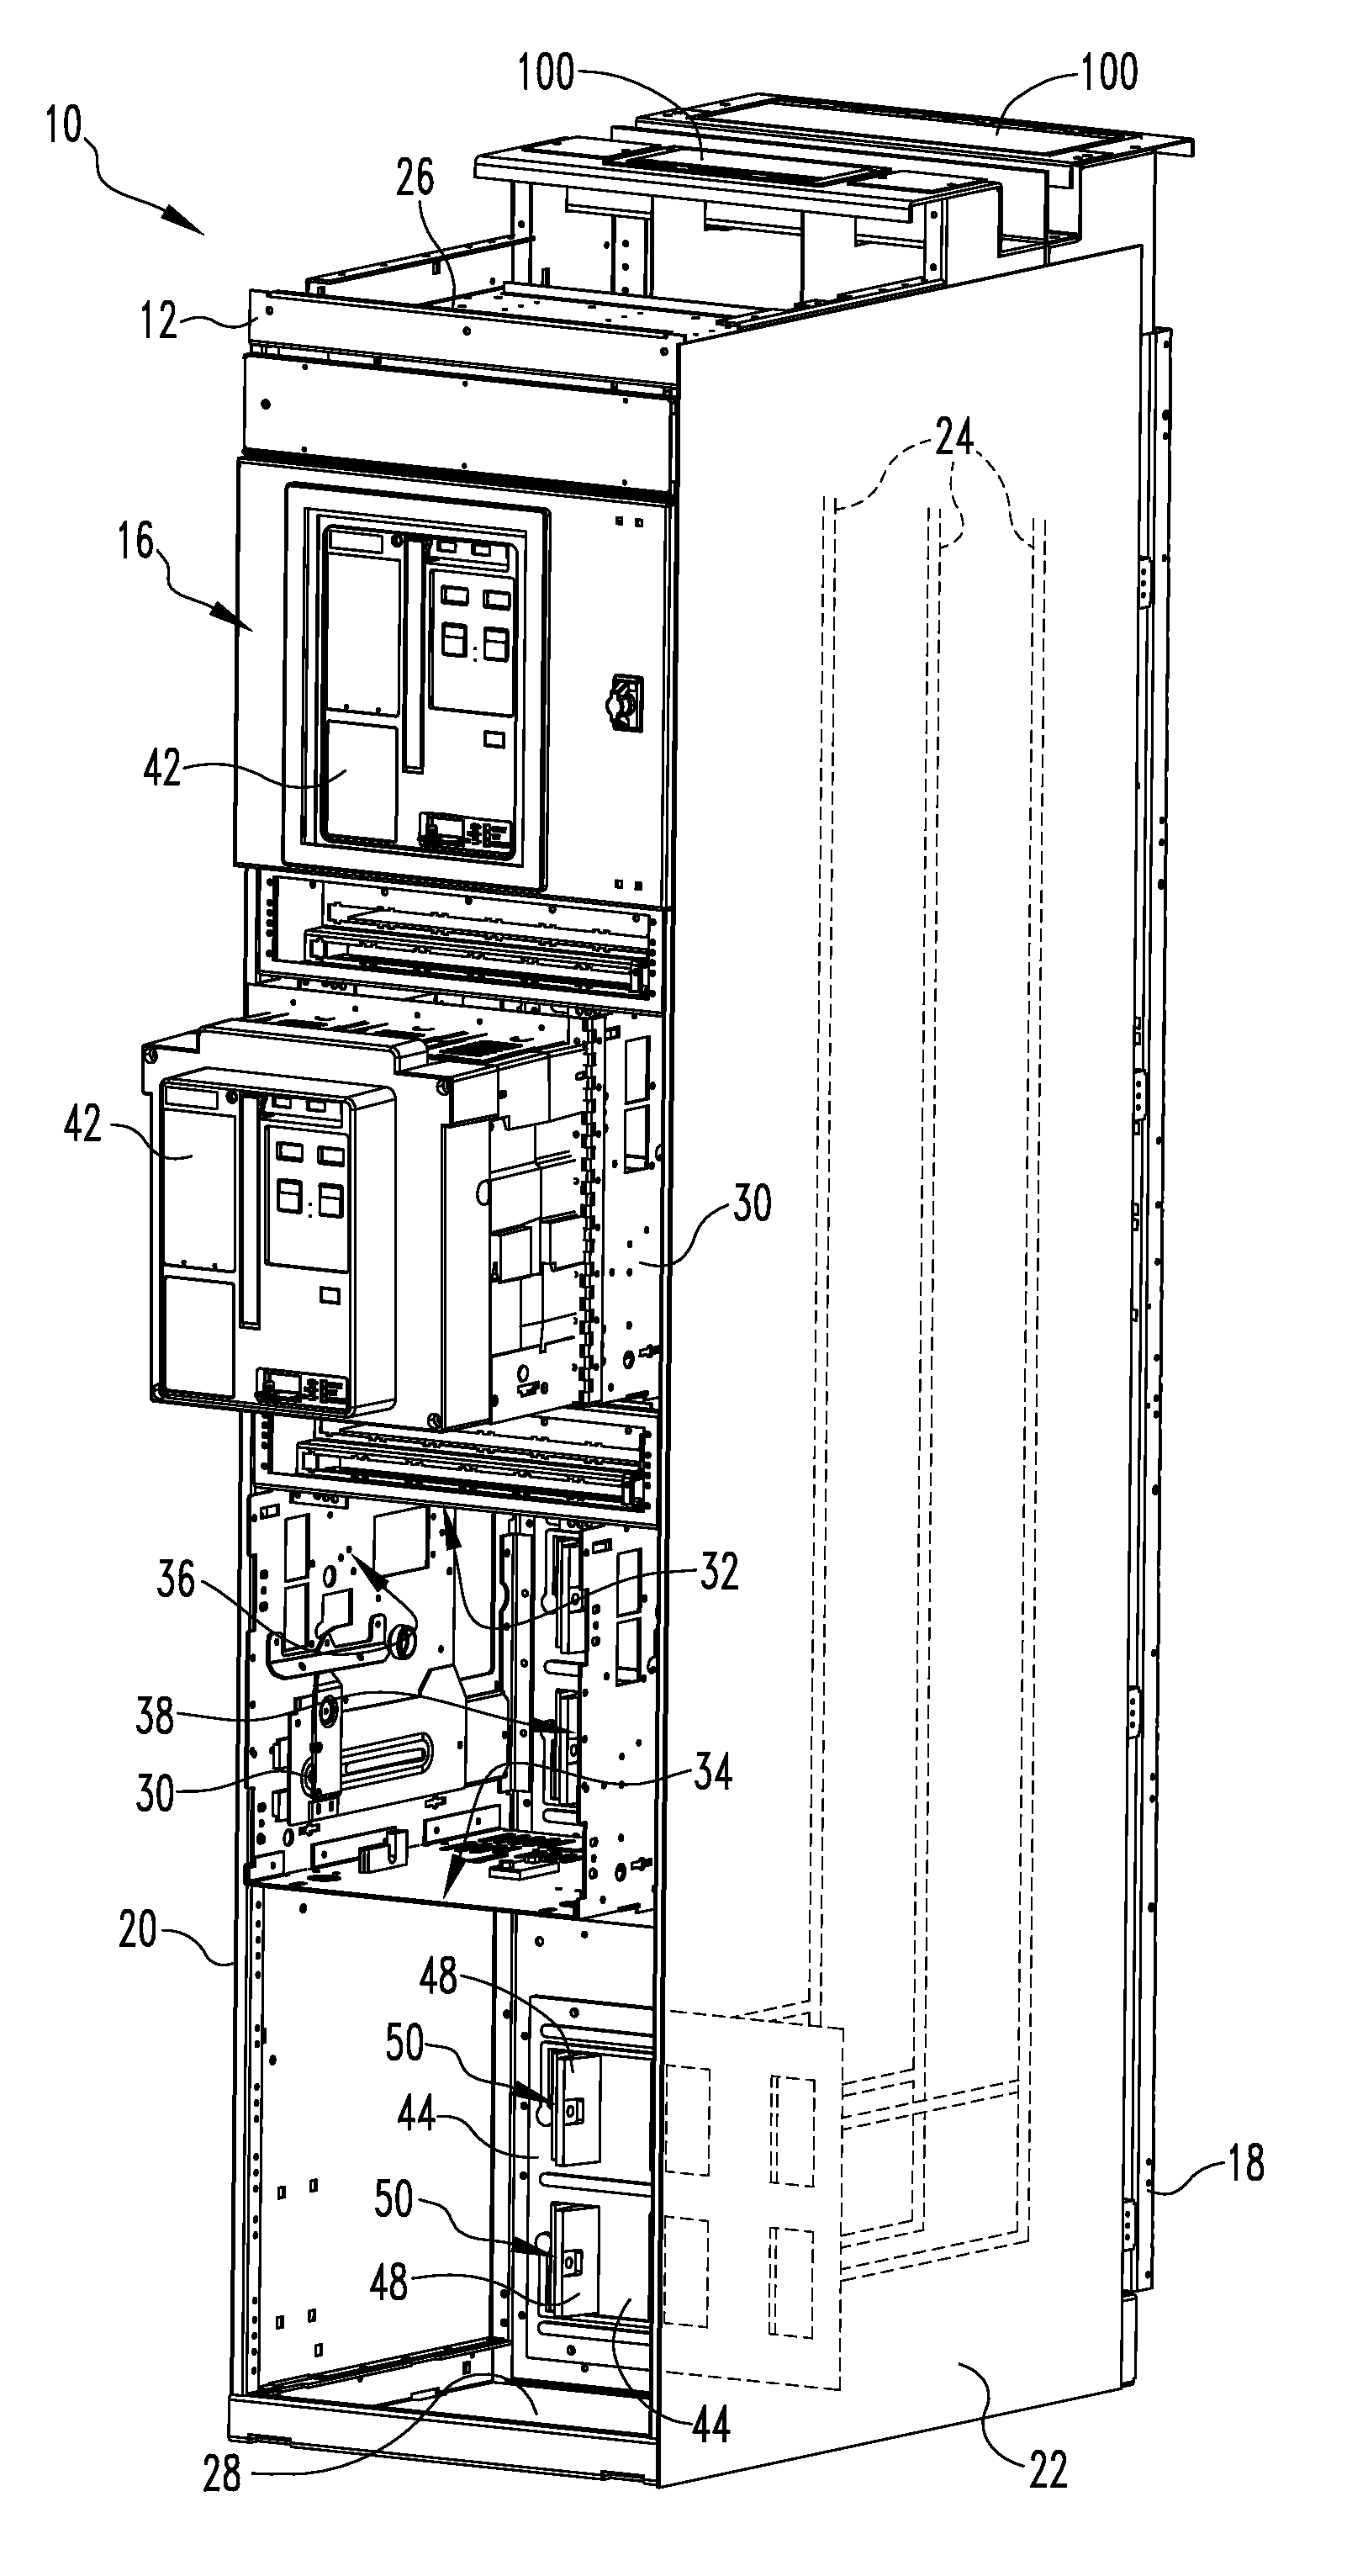 Electrical enclosure assembly having venting system